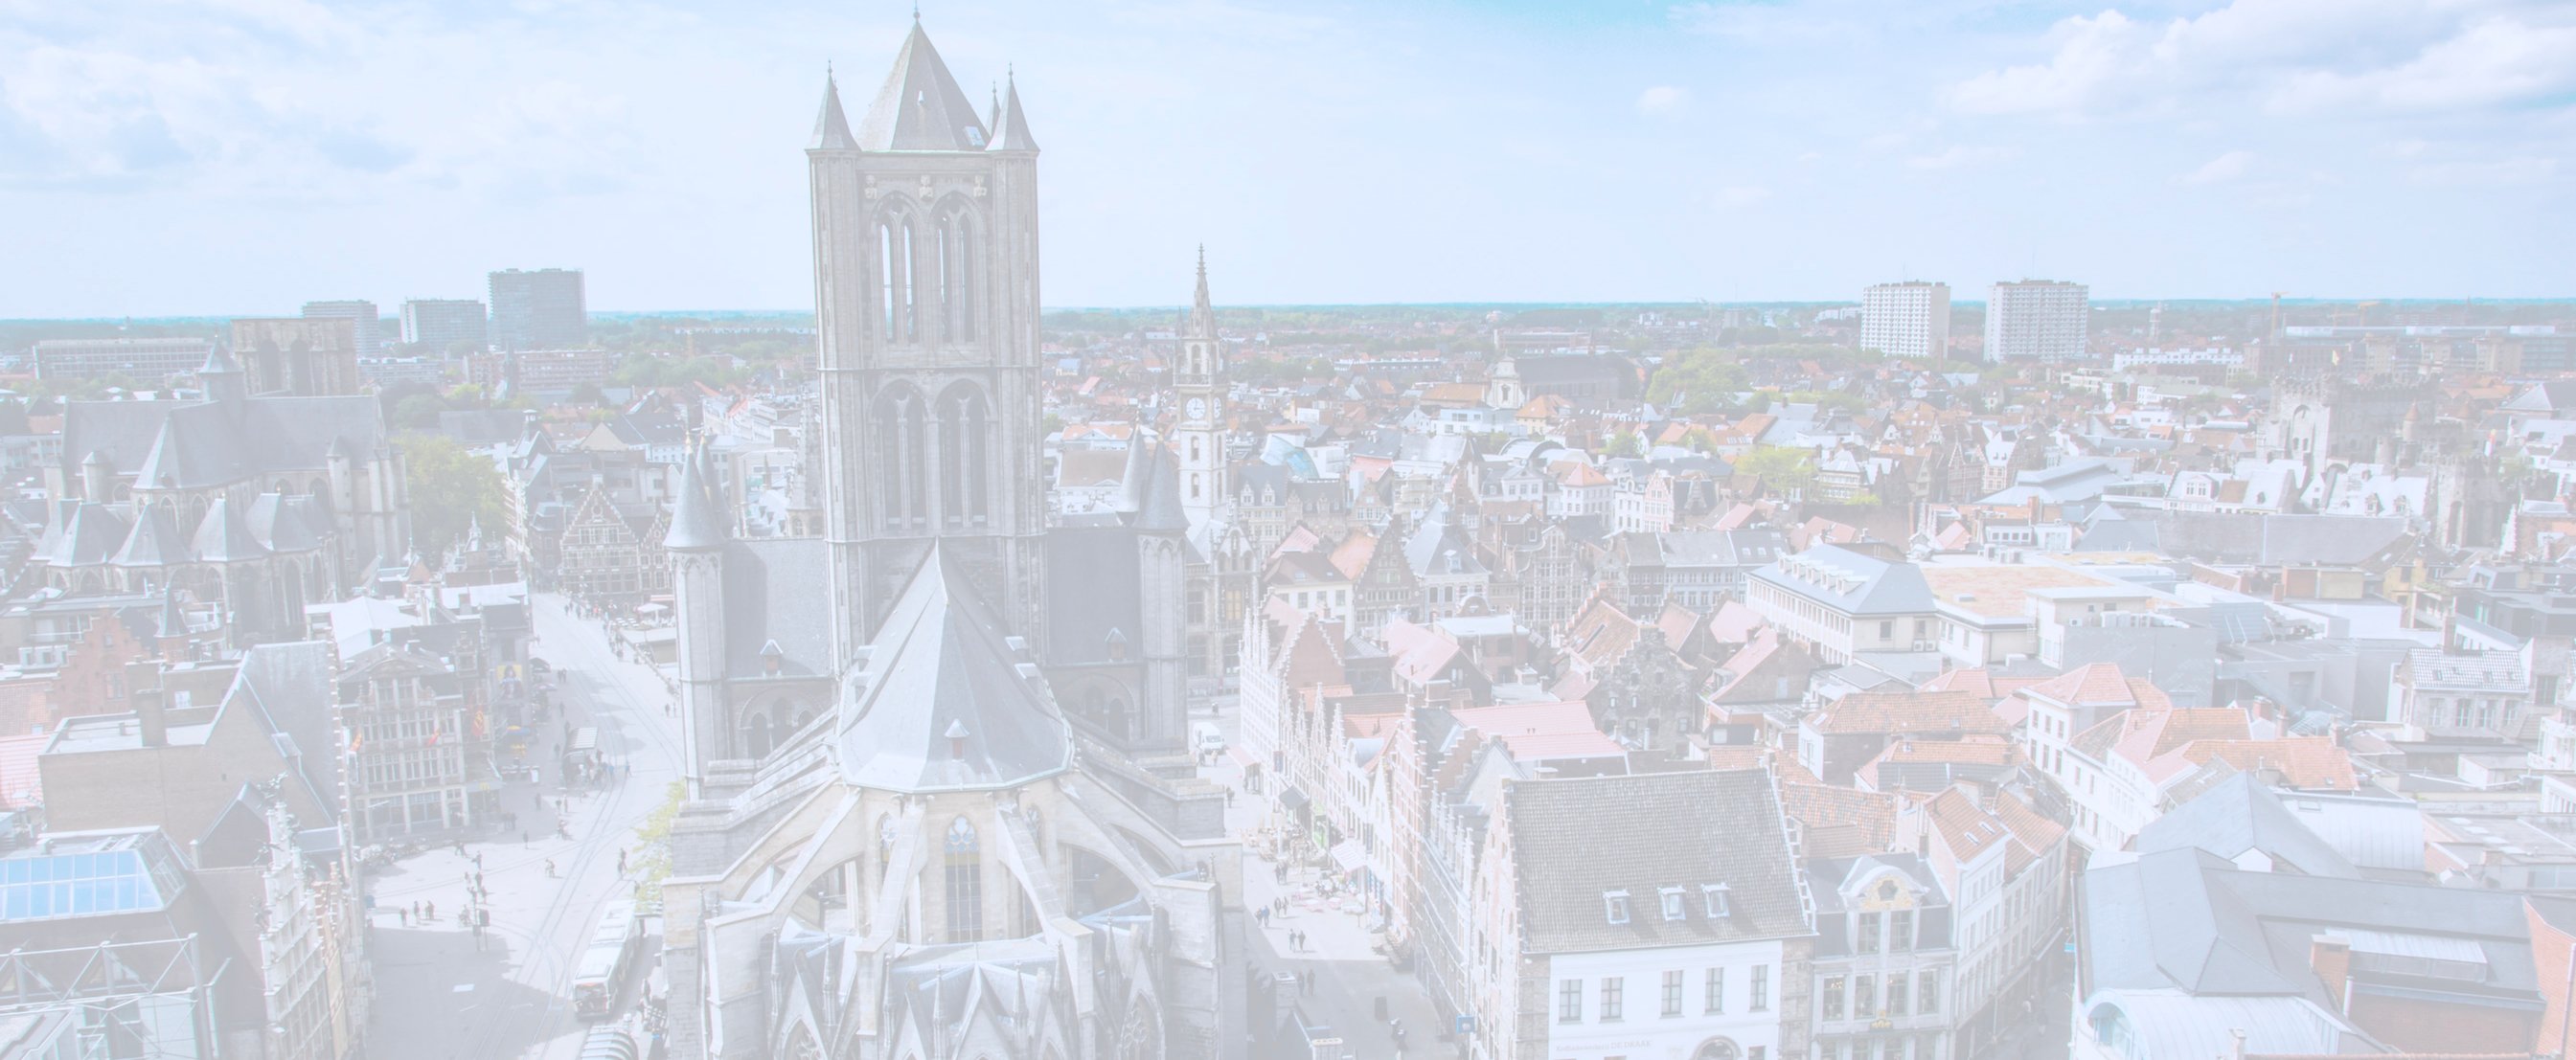 A faded out photo of Ghent, which is a city in Belgium. It has a huge cathedral in the foreground and is full of buildings.